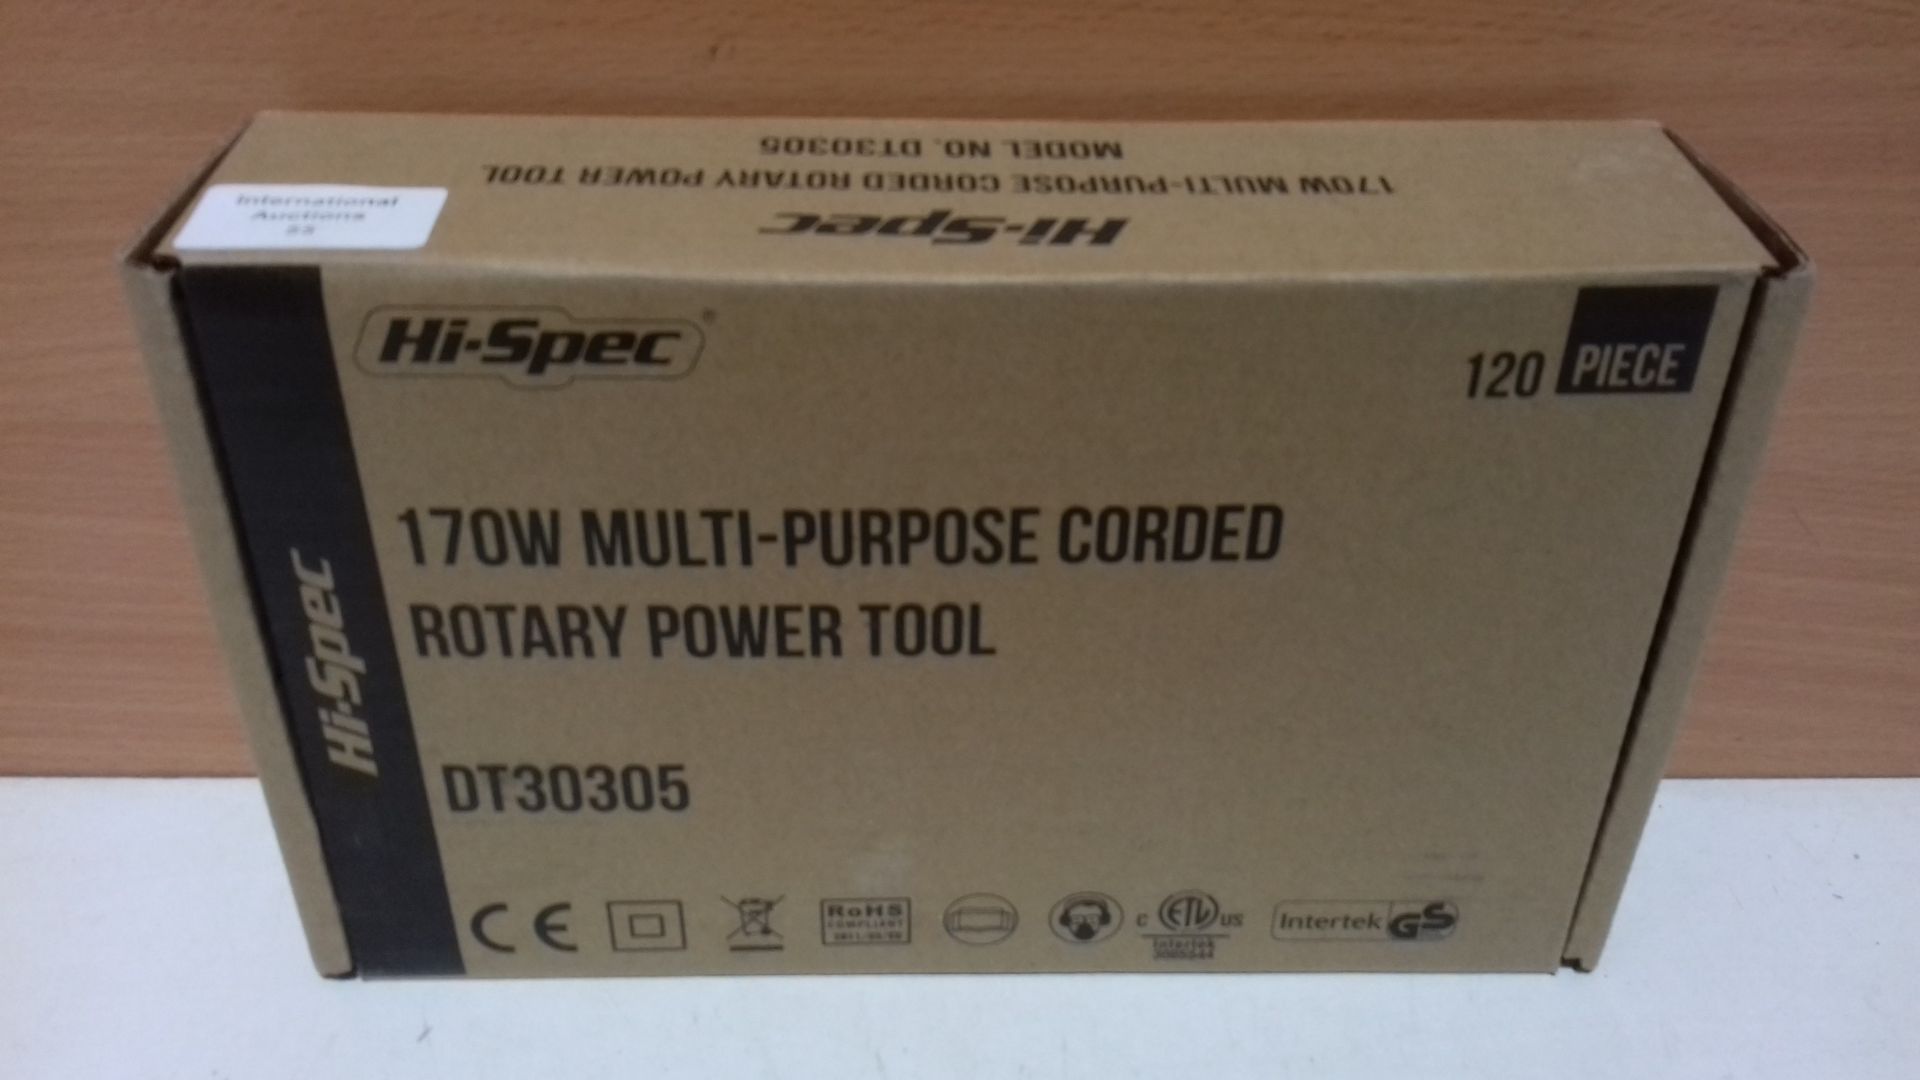 RRP £20.44 Hi-Spec 121 Piece 170W 1.4A Corded Rotary Power Tool - Image 2 of 2